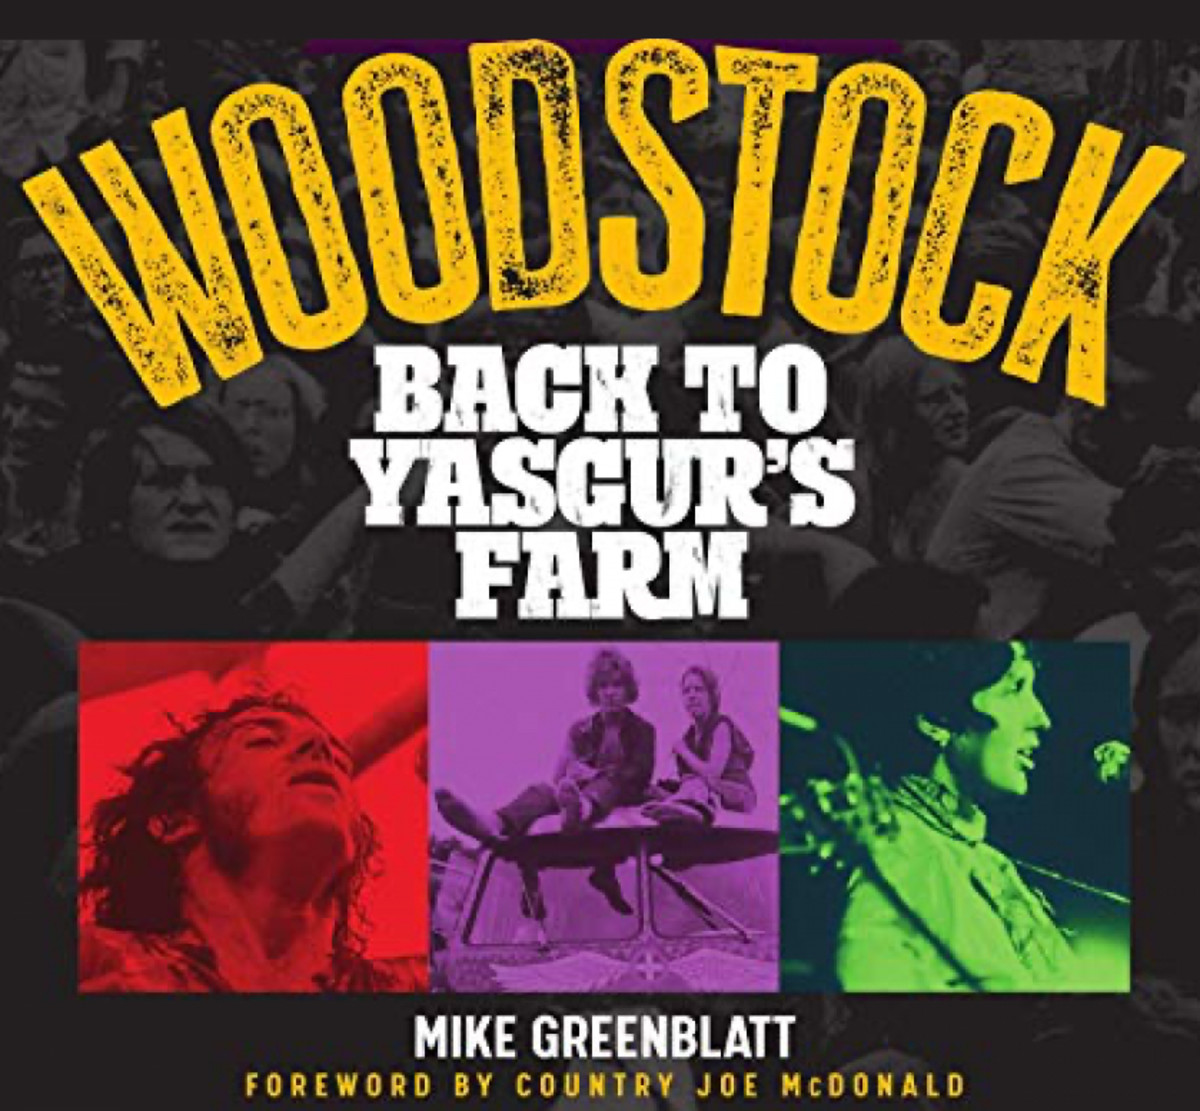 Go to Goldmine's Twitter page and tweet us your favorite album by a Woodstock artist — you can win a copy of Mike Greenblatt's Back to Yasgur's Farm (above).